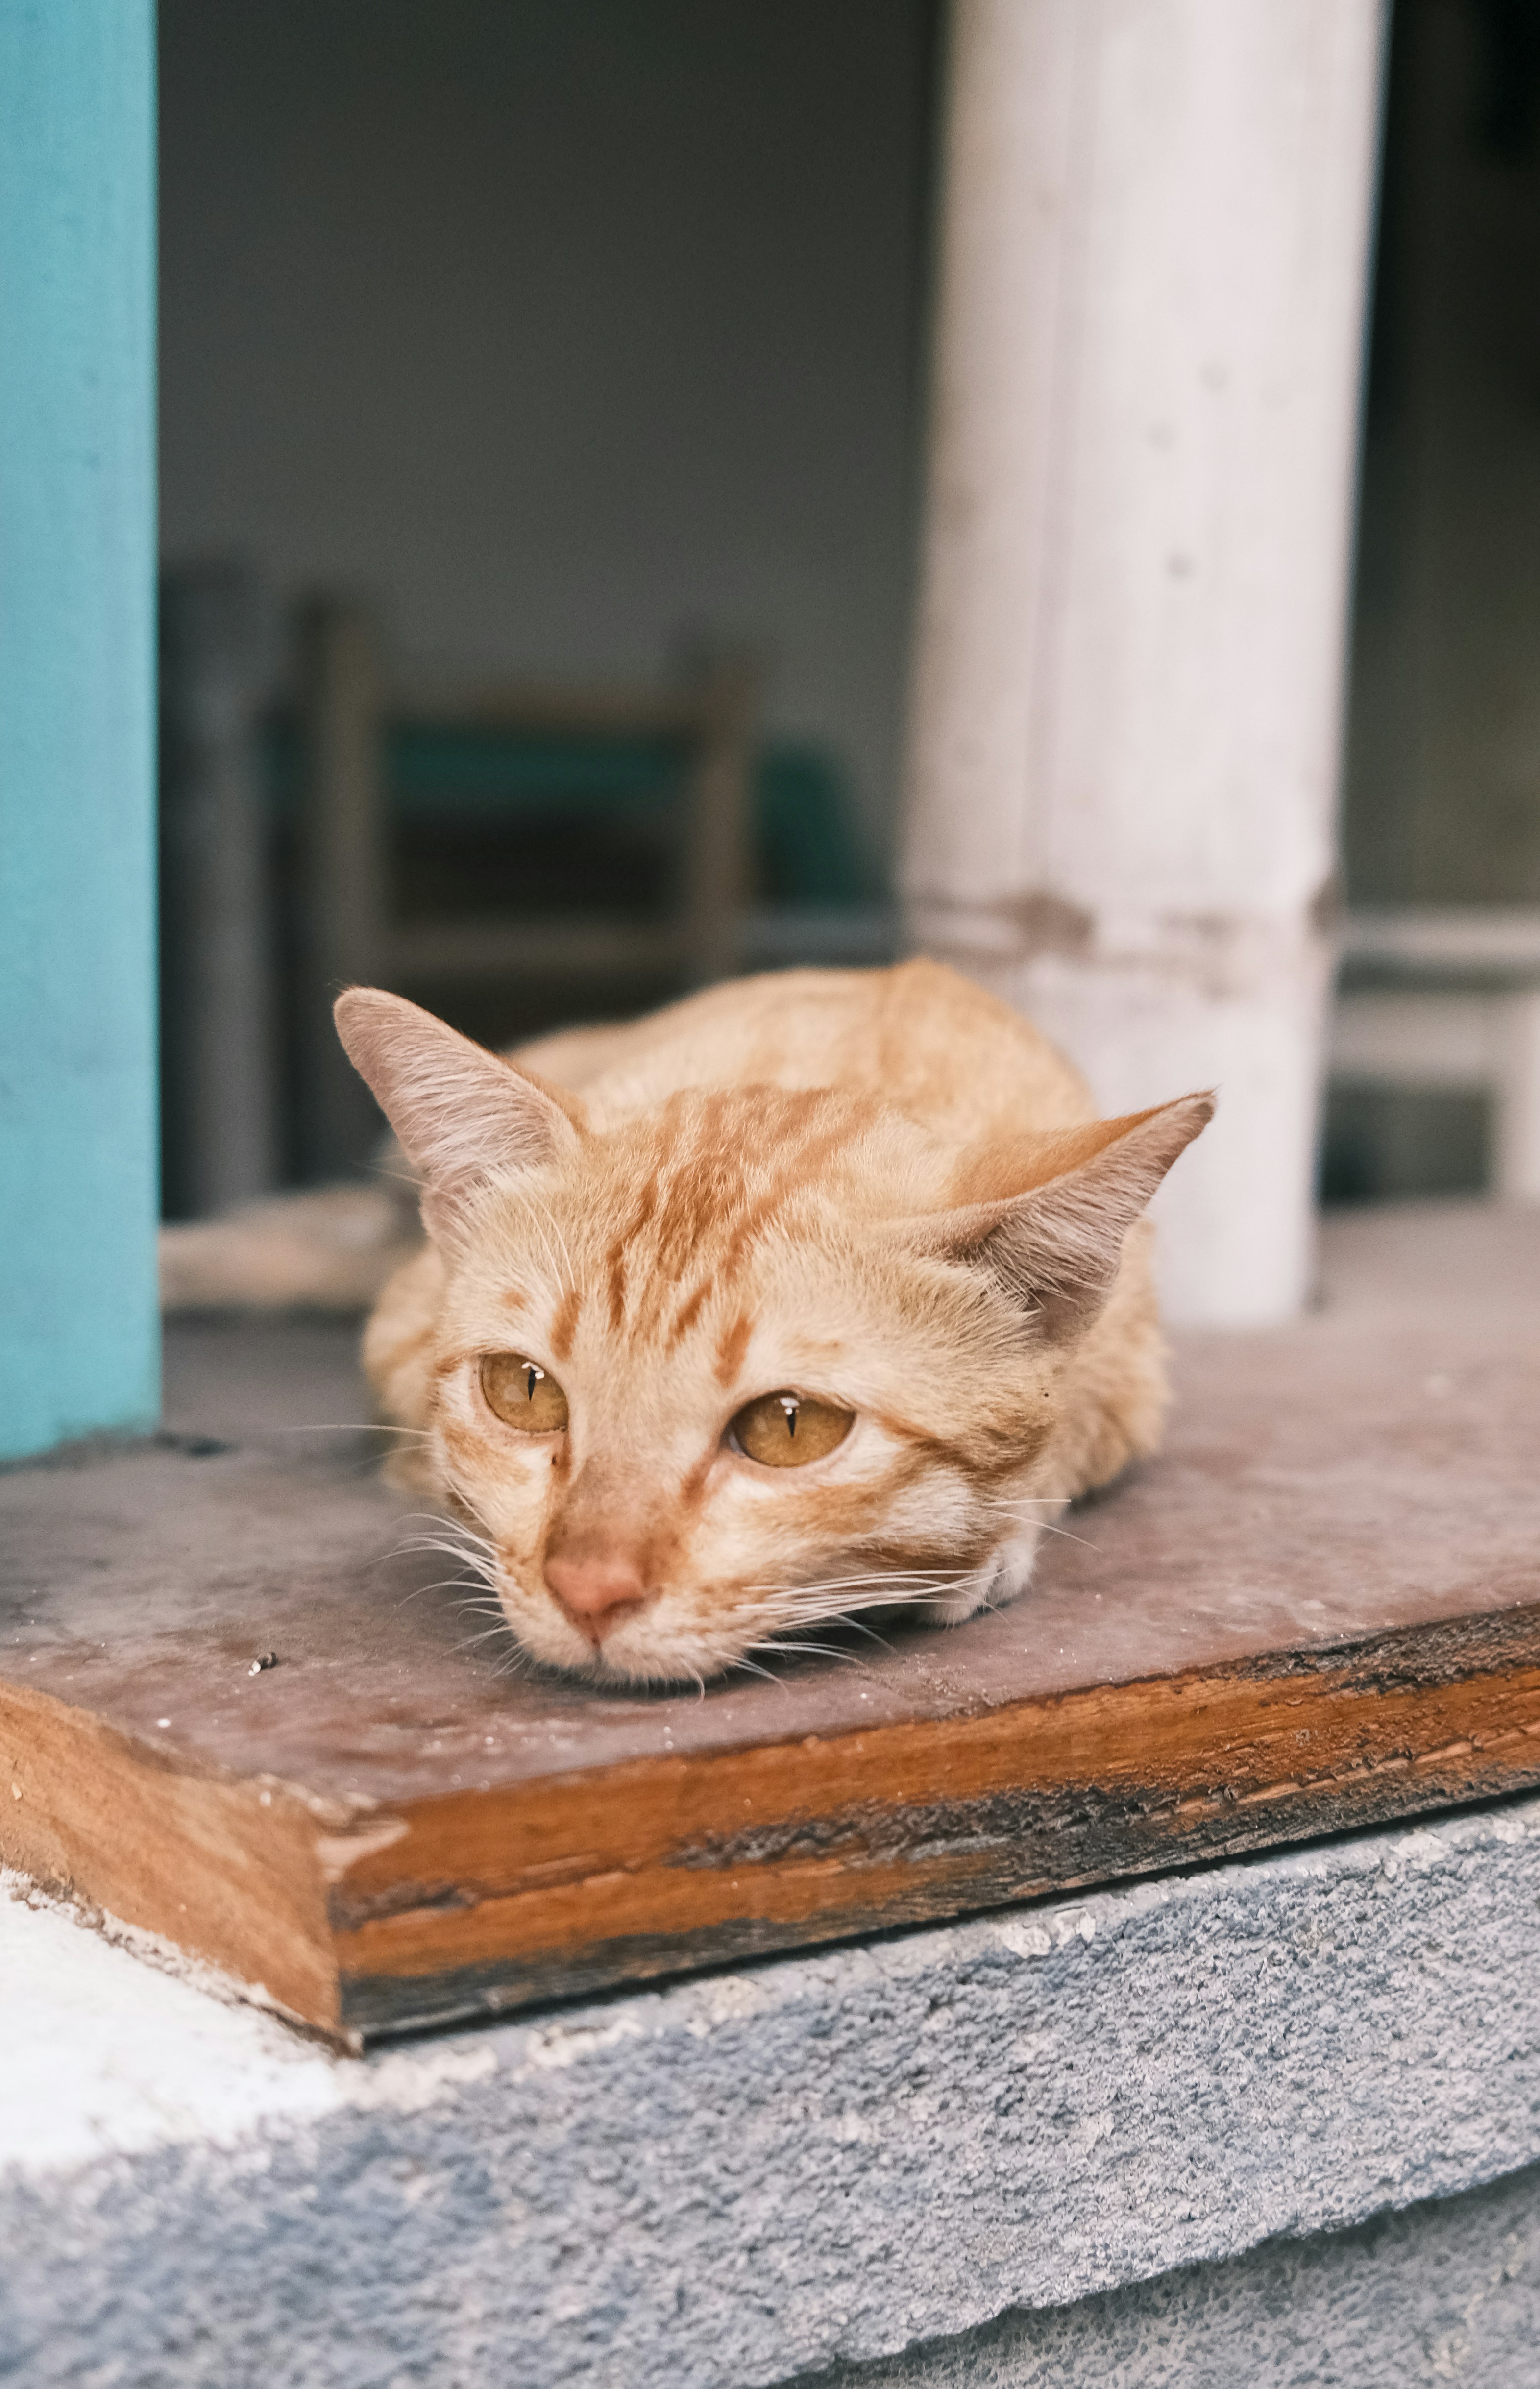 9 lives isn't enough to capture the amazing-ness of cats. You need high-quality, professionally photographed images to do that. Unsplash's collection of cat images capture the wonder of the kitty in high-definition, and you can use these images however you wish for free.